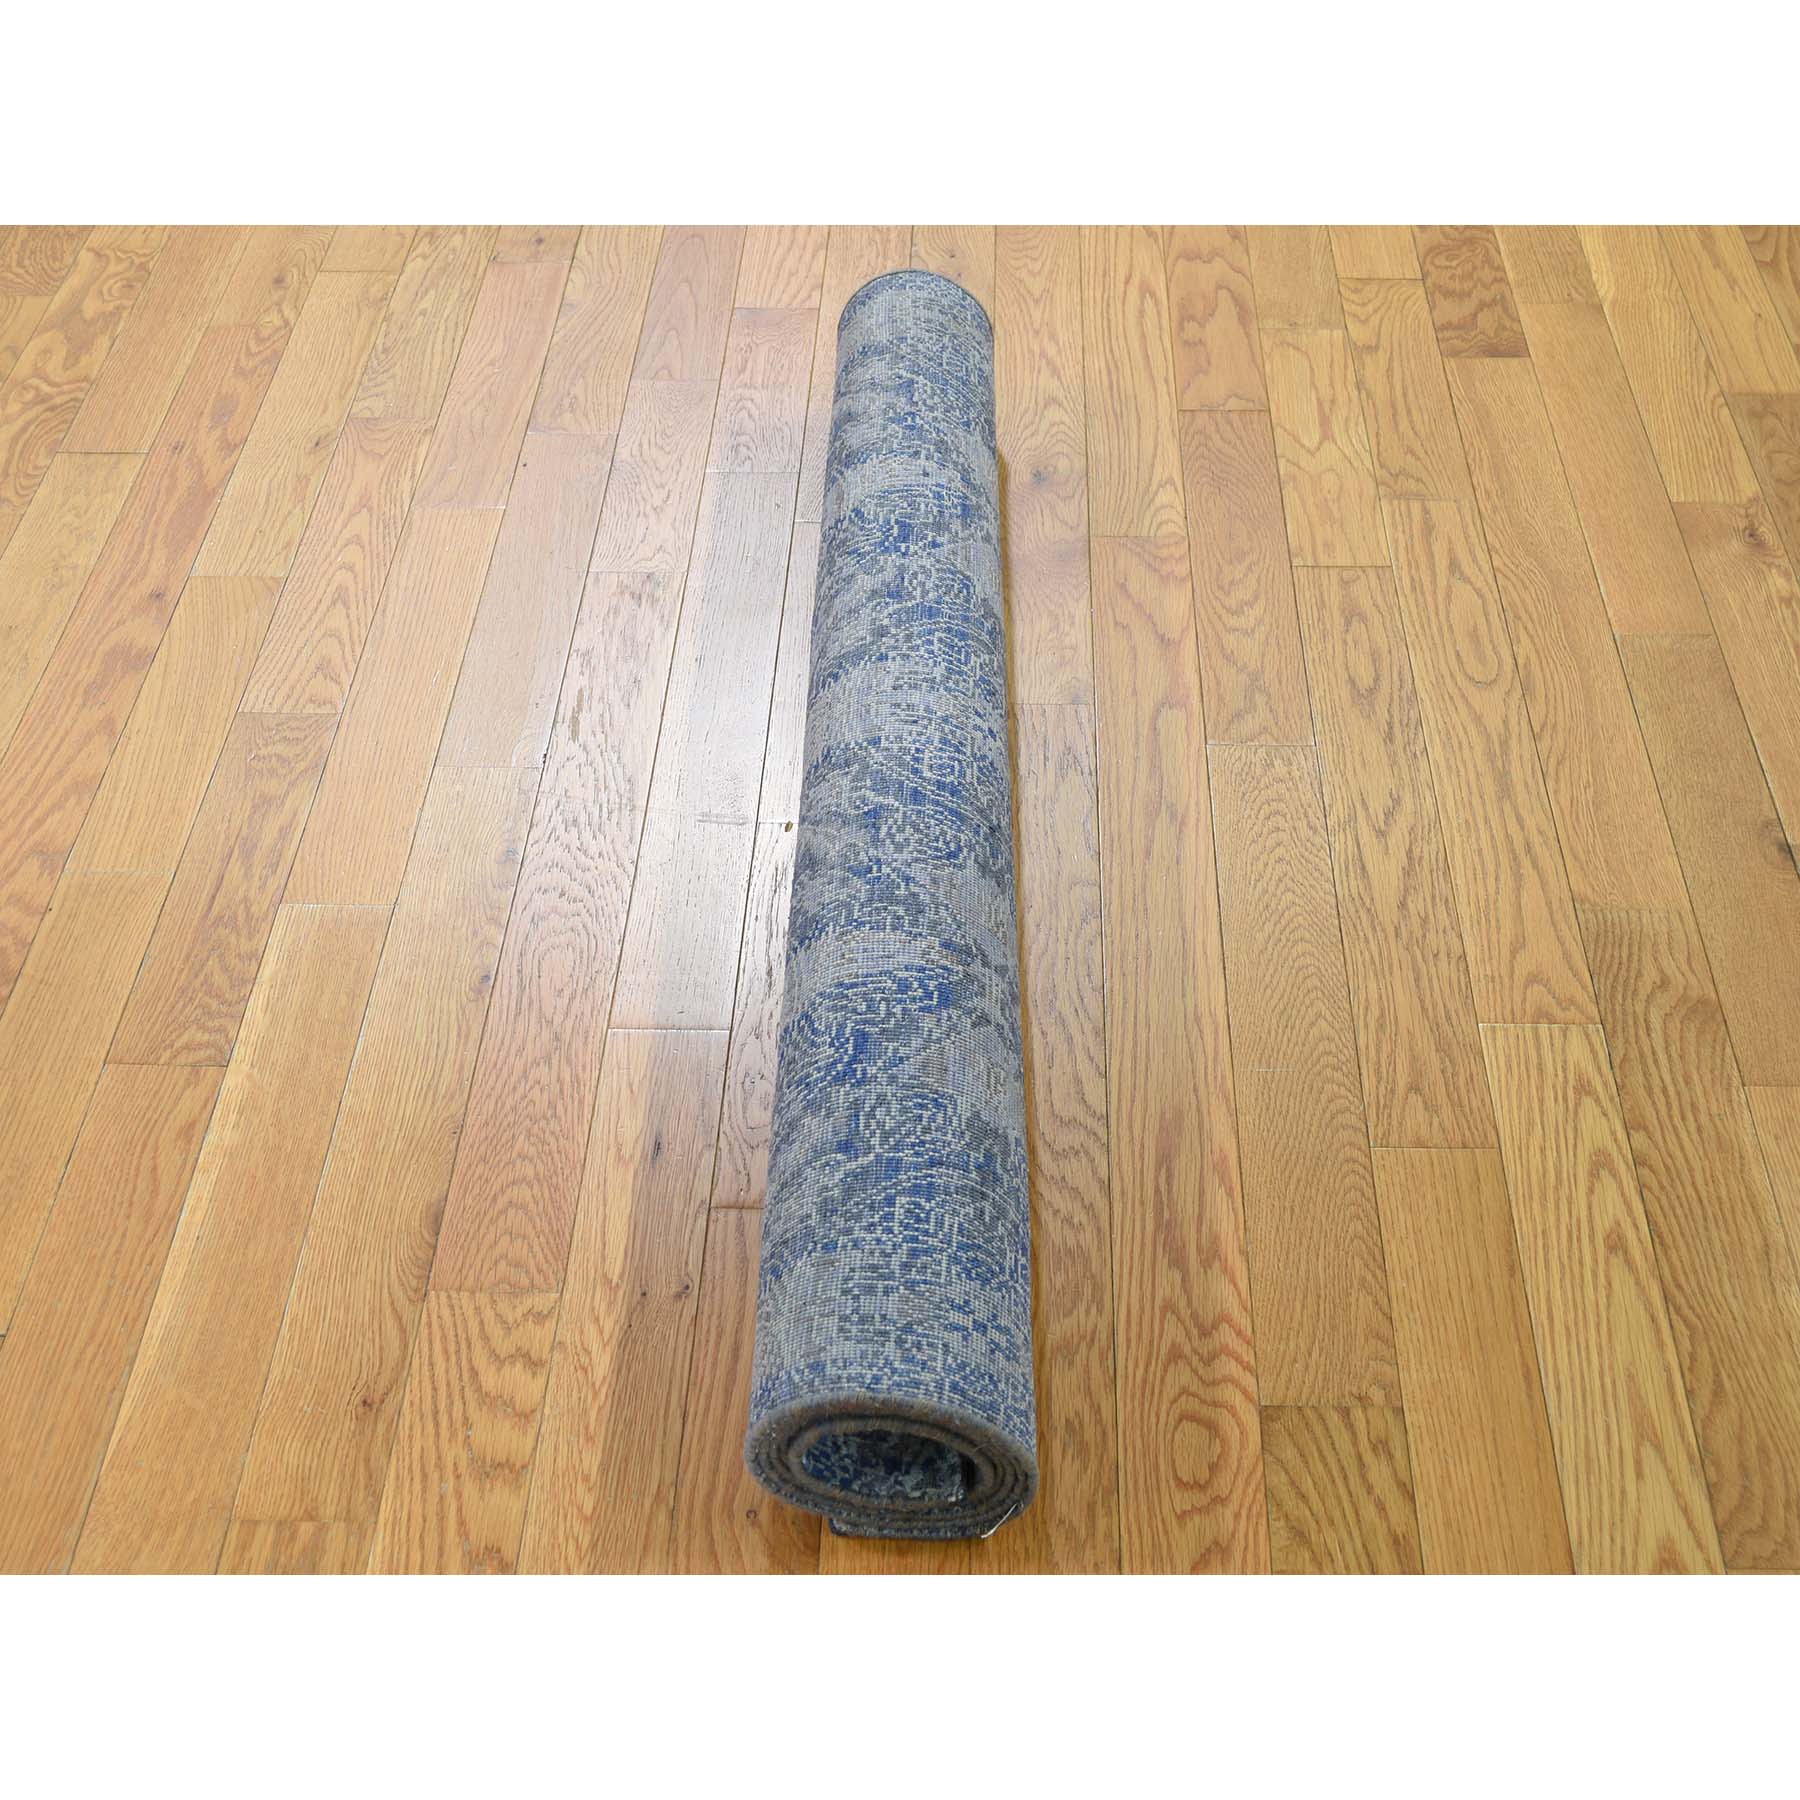 4-x6-2  Silk With Oxidized Wool Denim Blue Erased Rossette Design Hand-Knotted Oriental Rug 